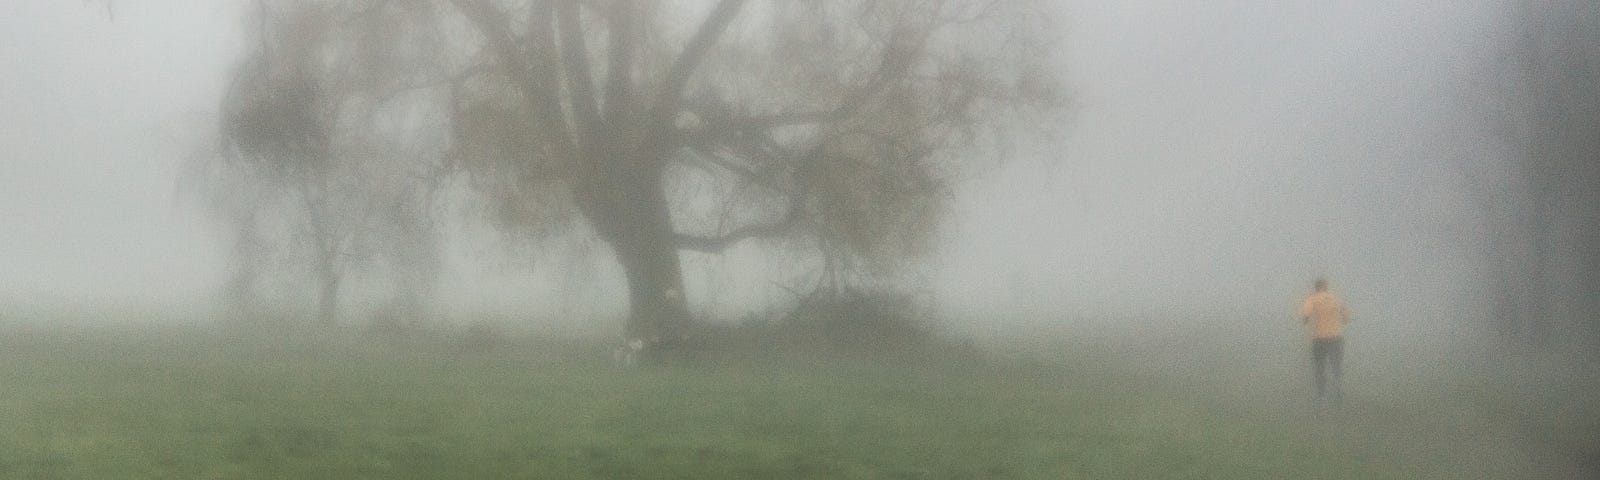 In London fog, a man and dog sit under a tree while a man jogs past.